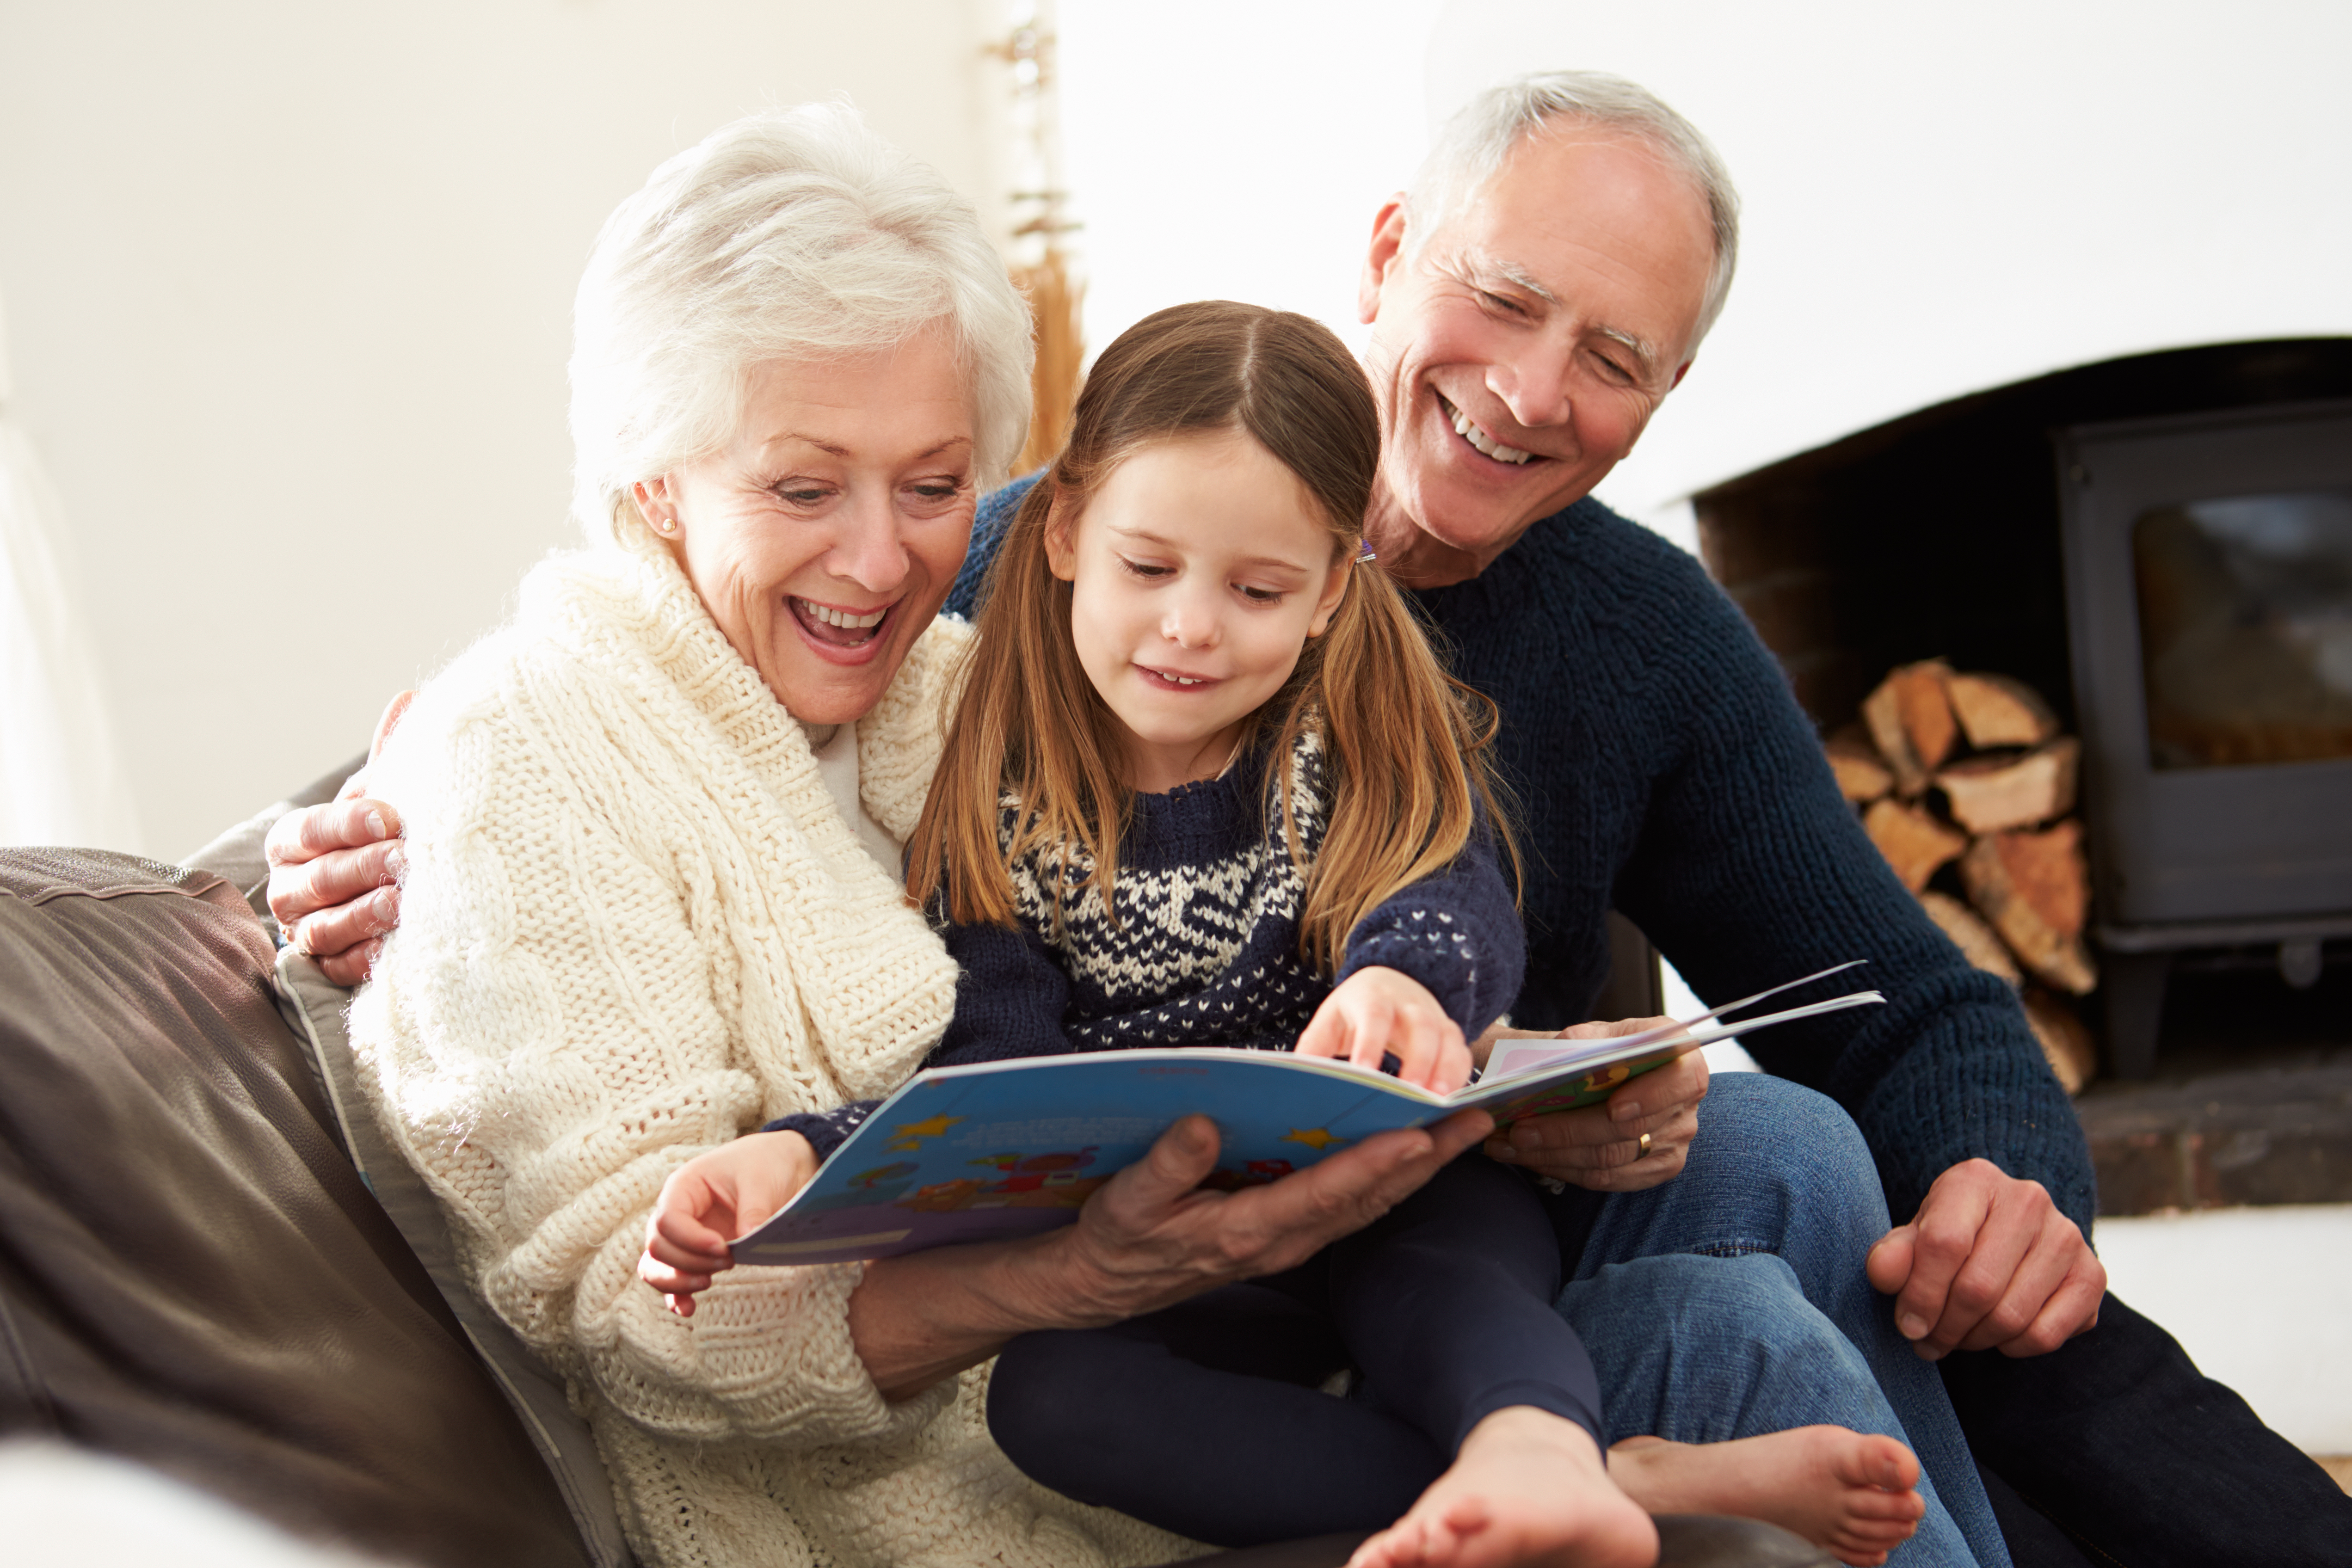 A senior couple spending time with their granddaughter | Source: Shutterstock